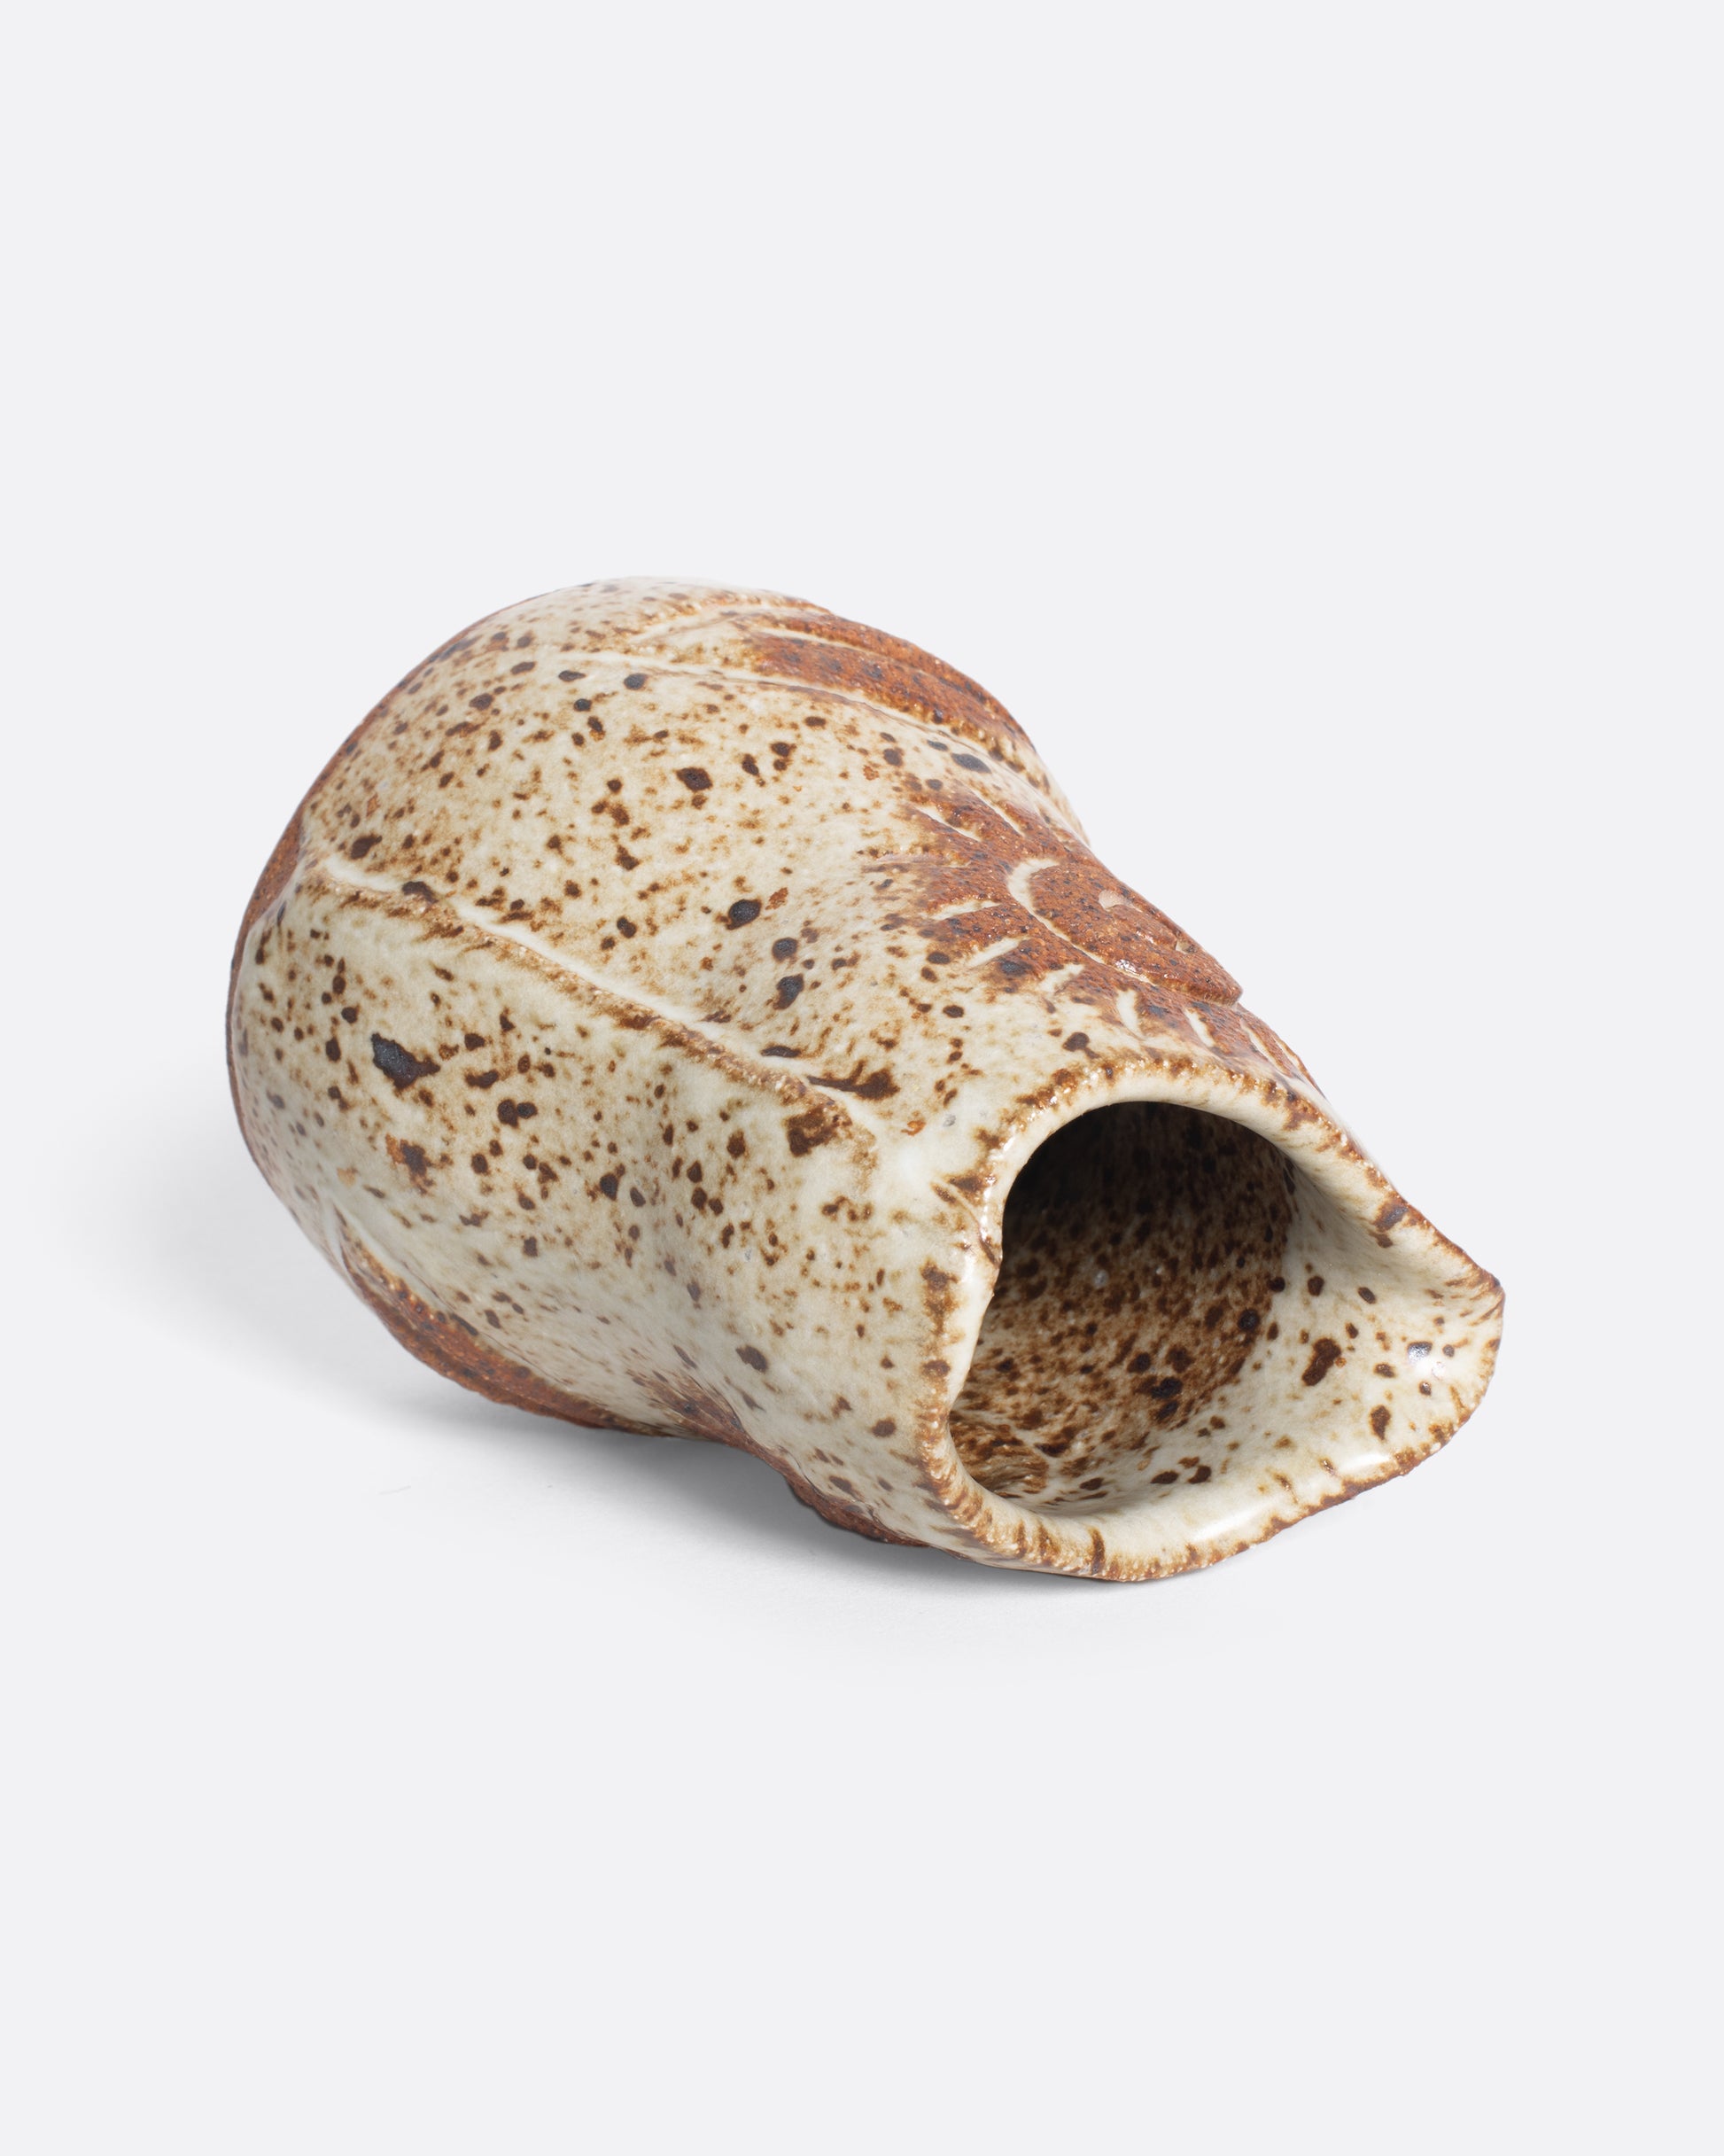 A handmade ceramic bird creamer, full of personality, with an impressionist design and speckled, satin glaze.